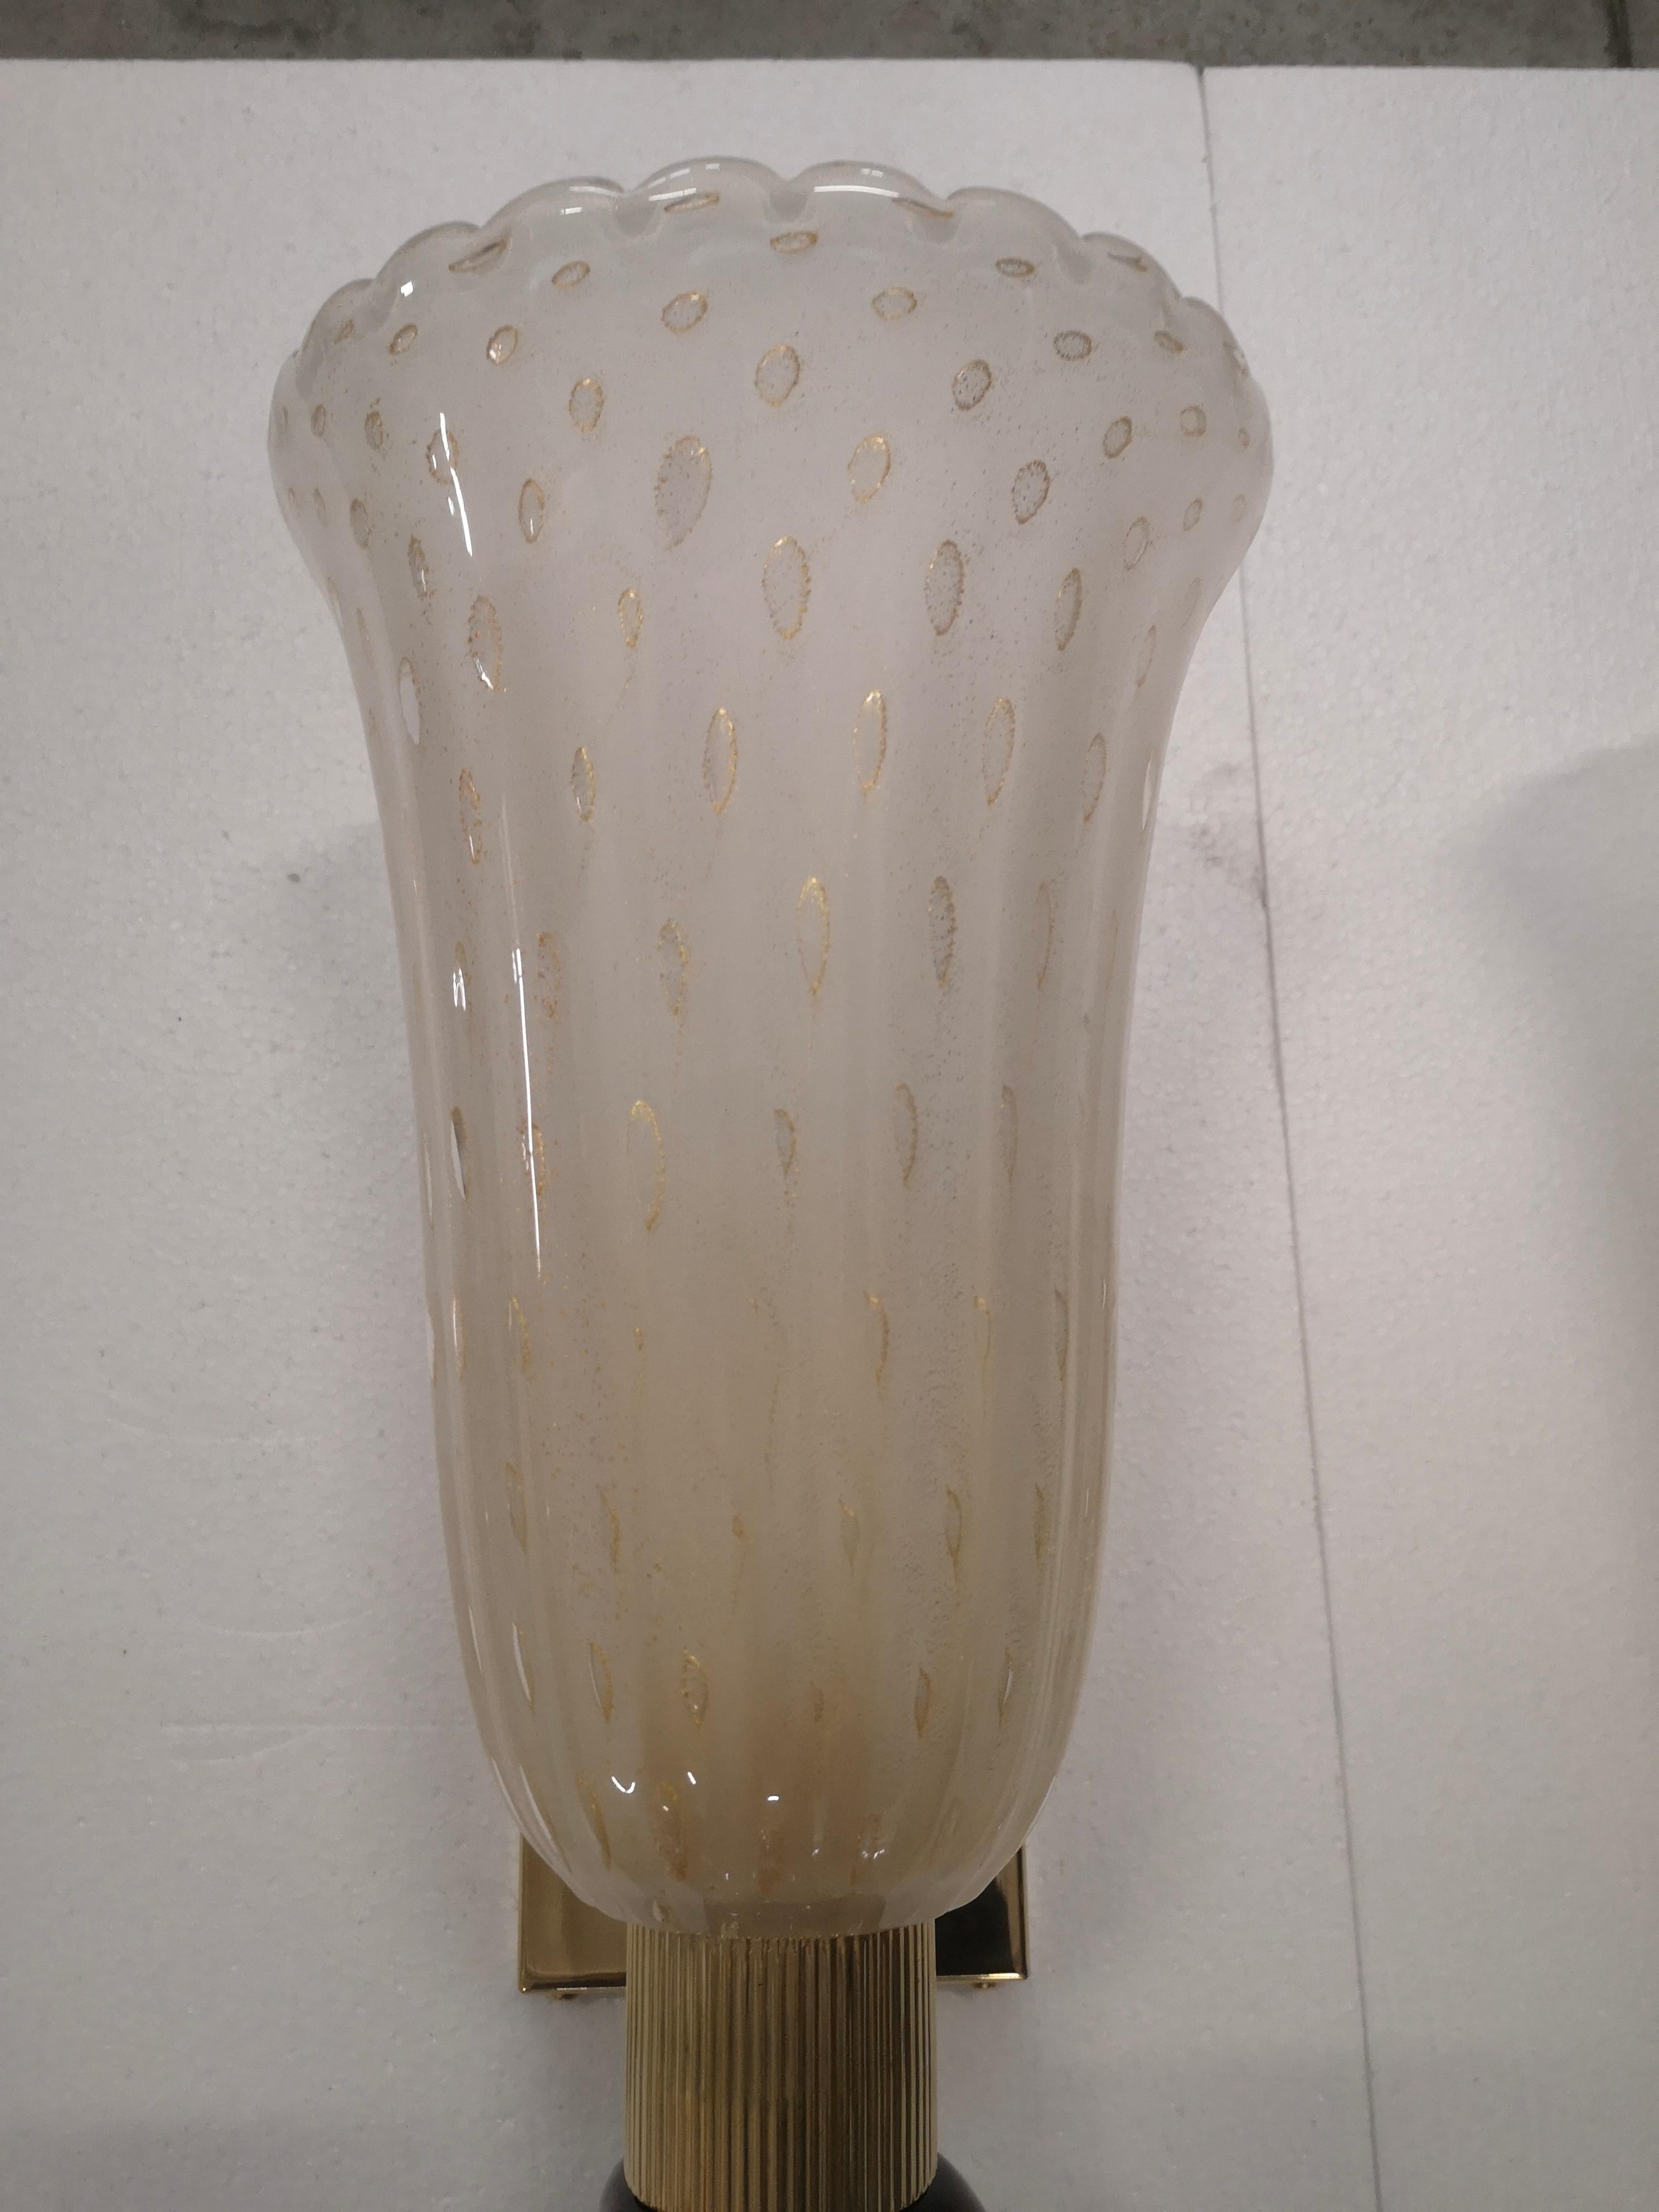 Refined and delicate design for this pair of wall light with black and cream color Murano glass.

The pair of wall light has a brass structure, on which a beautiful cream-colored Murano glass cup has been mounted on the upper part, which contains